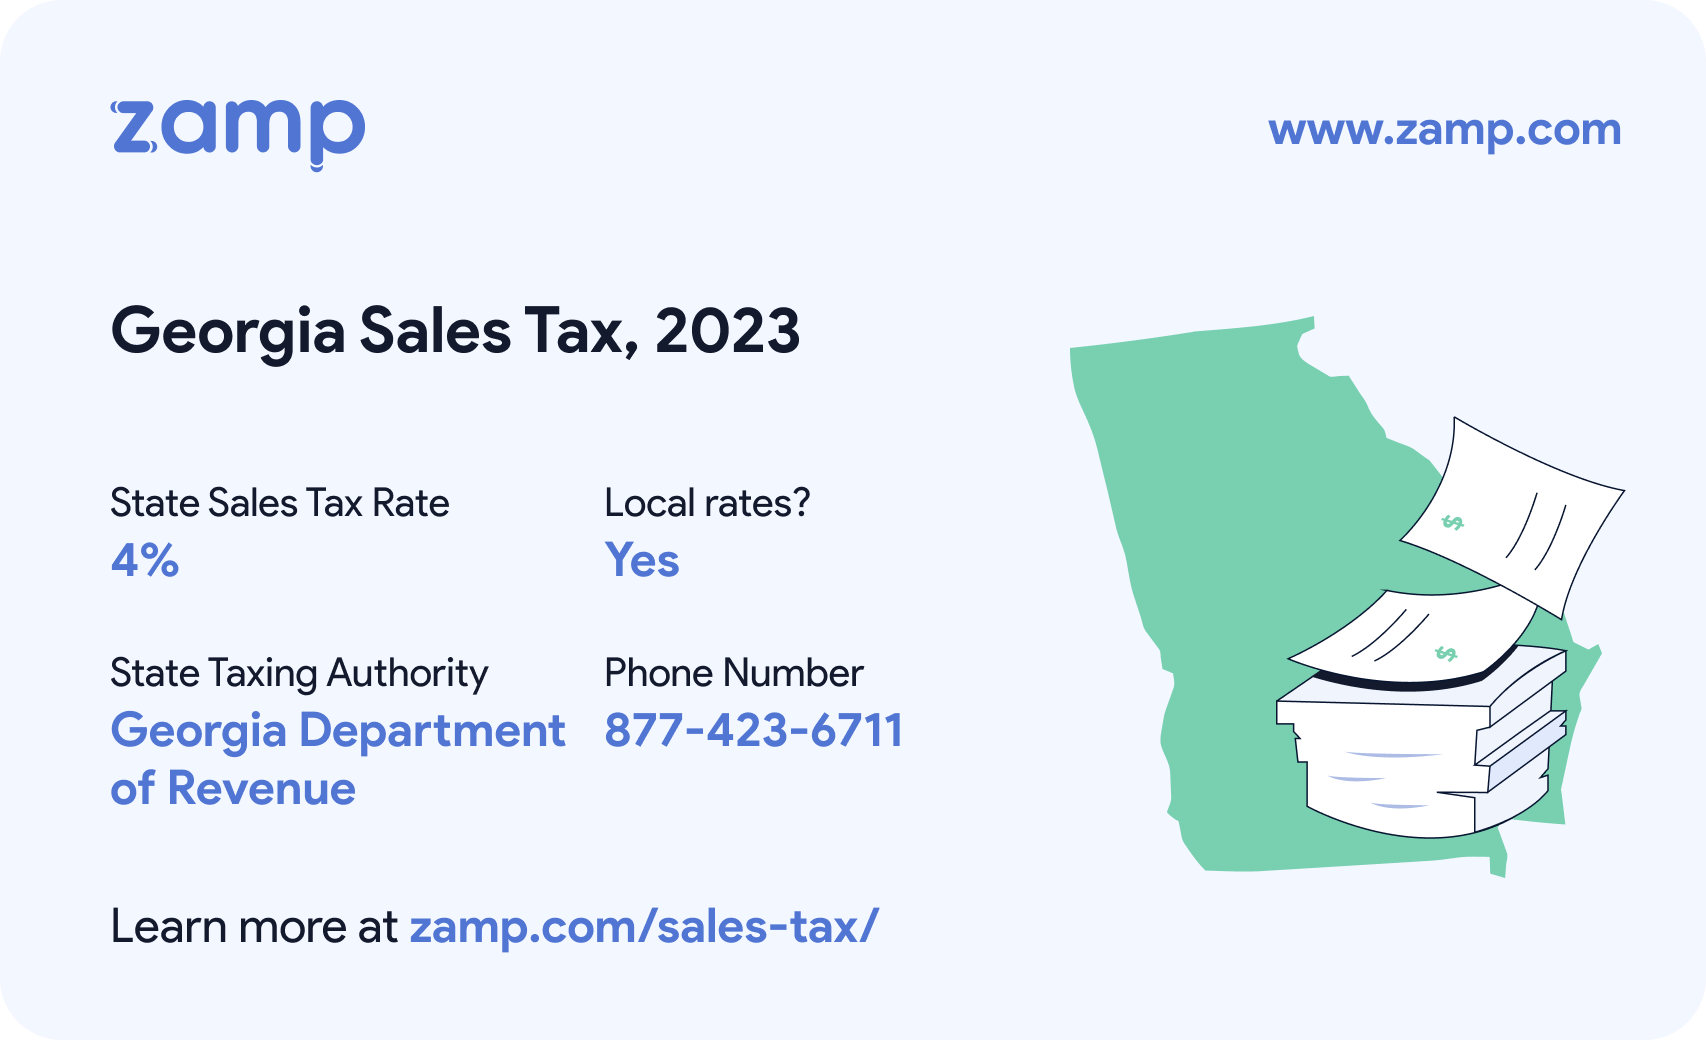 Georgia basic sales tax info for 2023 - State sales tax rate: 4%, Local rates? Yes; State Taxing Authority: Georgia Department of Revenue; and phone number 877-423-6711